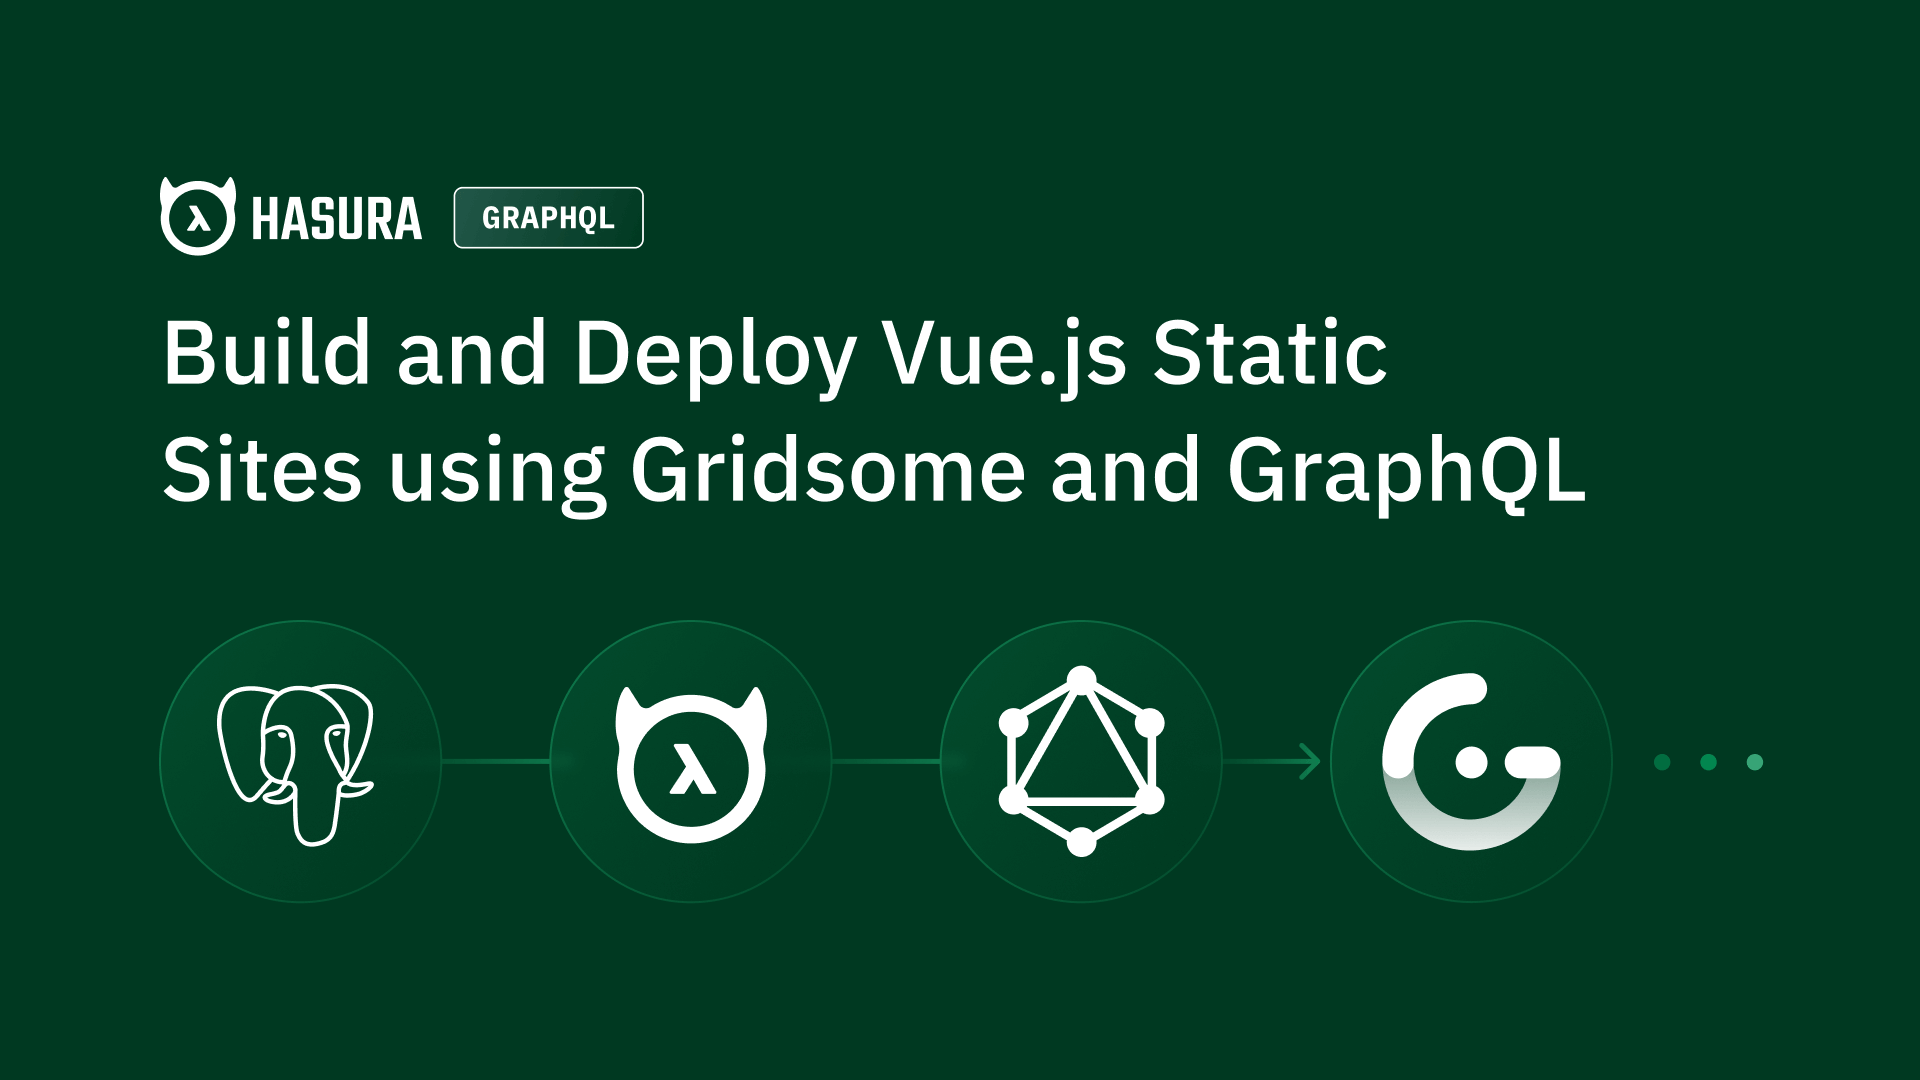 Build and Deploy Vue.js Static Sites using Gridsome and GraphQL